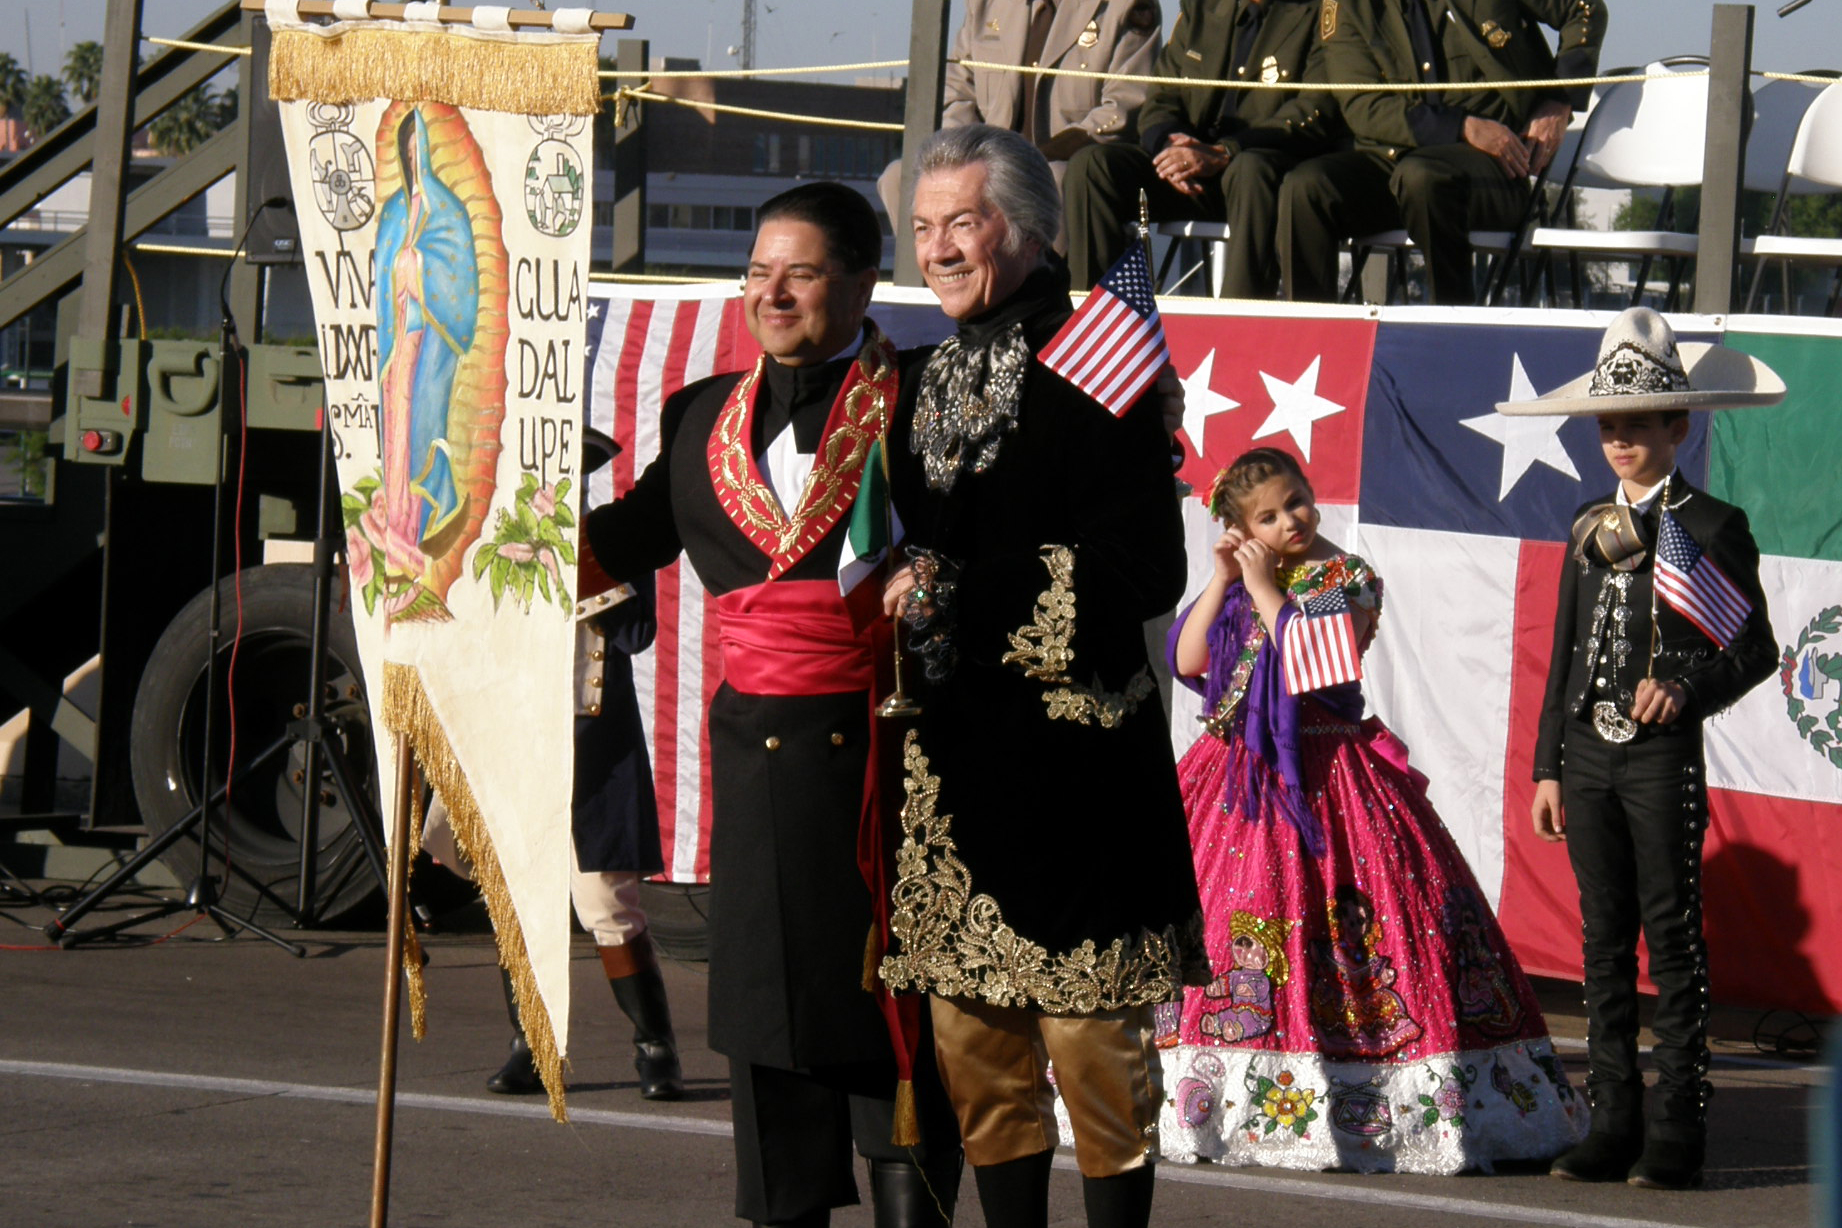 Two officials of the ceremony standing with a banner of the Virgin Mary, two children stand behind them in traditional Mexican festival costumes